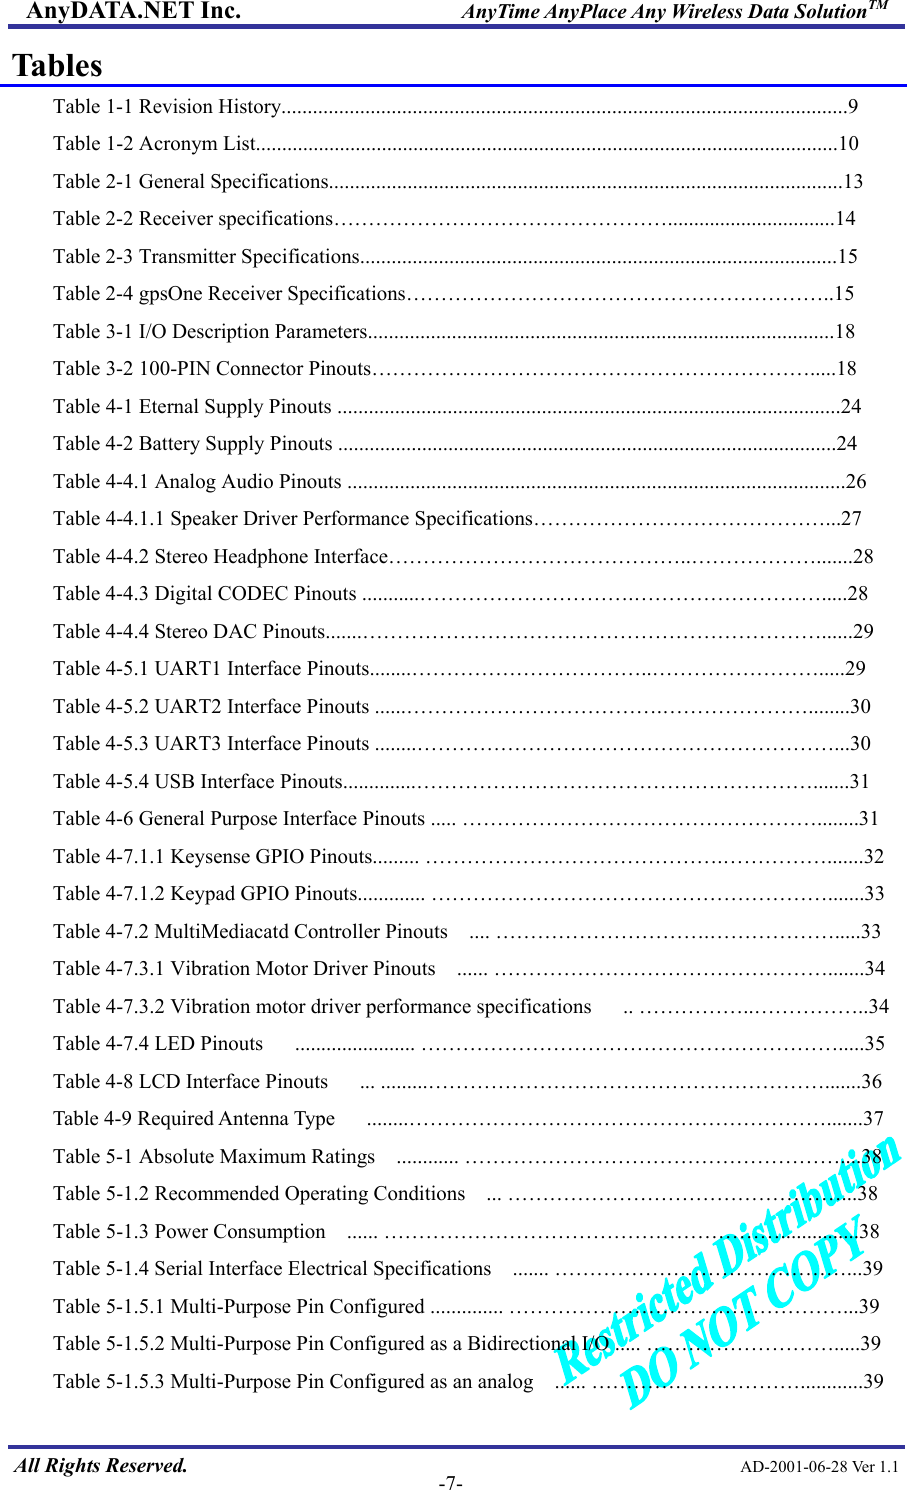 AnyDATA.NET Inc.                     AnyTime AnyPlace Any Wireless Data SolutionTM Tables Table 1-1 Revision History............................................................................................................9 Table 1-2 Acronym List...............................................................................................................10 Table 2-1 General Specifications..................................................................................................13 Table 2-2 Receiver specifications…………………………………………................................14 Table 2-3 Transmitter Specifications...........................................................................................15 Table 2-4 gpsOne Receiver Specifications……………………………………………………..15 Table 3-1 I/O Description Parameters.........................................................................................18 Table 3-2 100-PIN Connector Pinouts……………………………………………………….....18 Table 4-1 Eternal Supply Pinouts ................................................................................................24 Table 4-2 Battery Supply Pinouts ...............................................................................................24 Table 4-4.1 Analog Audio Pinouts ...............................................................................................26 Table 4-4.1.1 Speaker Driver Performance Specifications……………………………………...27 Table 4-4.2 Stereo Headphone Interface……………………………………..……………….......28 Table 4-4.3 Digital CODEC Pinouts ...........………………………….……………………….....28 Table 4-4.4 Stereo DAC Pinouts.......…………………………………………………………......29 Table 4-5.1 UART1 Interface Pinouts........……………………………..…………………….....29 Table 4-5.2 UART2 Interface Pinouts ......……………………………….…………………........30 Table 4-5.3 UART3 Interface Pinouts ........……………………………………………………...30 Table 4-5.4 USB Interface Pinouts..............………………………………………………….......31 Table 4-6 General Purpose Interface Pinouts ..... ……………………………………………........31 Table 4-7.1.1 Keysense GPIO Pinouts......... …………………………………….…………….......32 Table 4-7.1.2 Keypad GPIO Pinouts............. ………………………………………………….......33 Table 4-7.2 MultiMediacatd Controller Pinouts  .... ………………………….……………….....33 Table 4-7.3.1 Vibration Motor Driver Pinouts    ...... ………………………………………….......34 Table 4-7.3.2 Vibration motor driver performance specifications   .. ……………..……………..34 Table 4-7.4 LED Pinouts      ....................... …………………………………………………….....35 Table 4-8 LCD Interface Pinouts      ... .........………………………………………………….......36 Table 4-9 Required Antenna Type   ........…………………………………………………….......37 Table 5-1 Absolute Maximum Ratings    ............ ………………………………………………....38 Table 5-1.2 Recommended Operating Conditions  ... …………………………………………...38 Table 5-1.3 Power Consumption   ...... …………………………………………………...............38 Table 5-1.4 Serial Interface Electrical Specifications  ....... ……………………………………...39 Table 5-1.5.1 Multi-Purpose Pin Configured .............. …………………………………………...39  All Rights Reserved.                                                AD-2001-06-28 Ver 1.1  -7-Table 5-1.5.2 Multi-Purpose Pin Configured as a Bidirectional I/O ..... ……………………….....39 Table 5-1.5.3 Multi-Purpose Pin Configured as an analog    ...... …………………………............39 